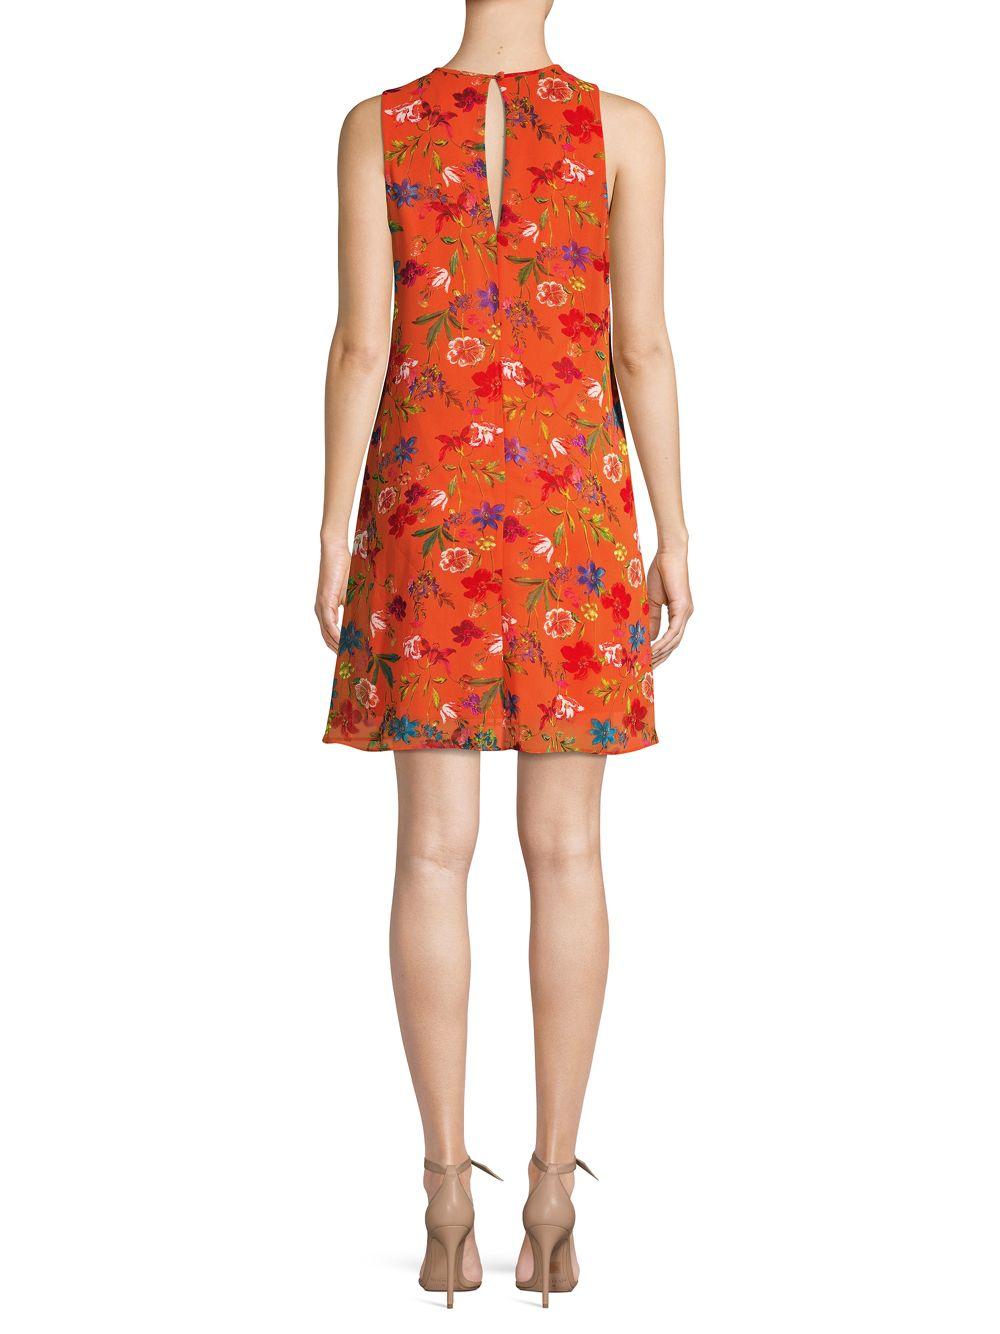 Calvin Klein Floral Chiffon Shift Dress in Red - Lyst